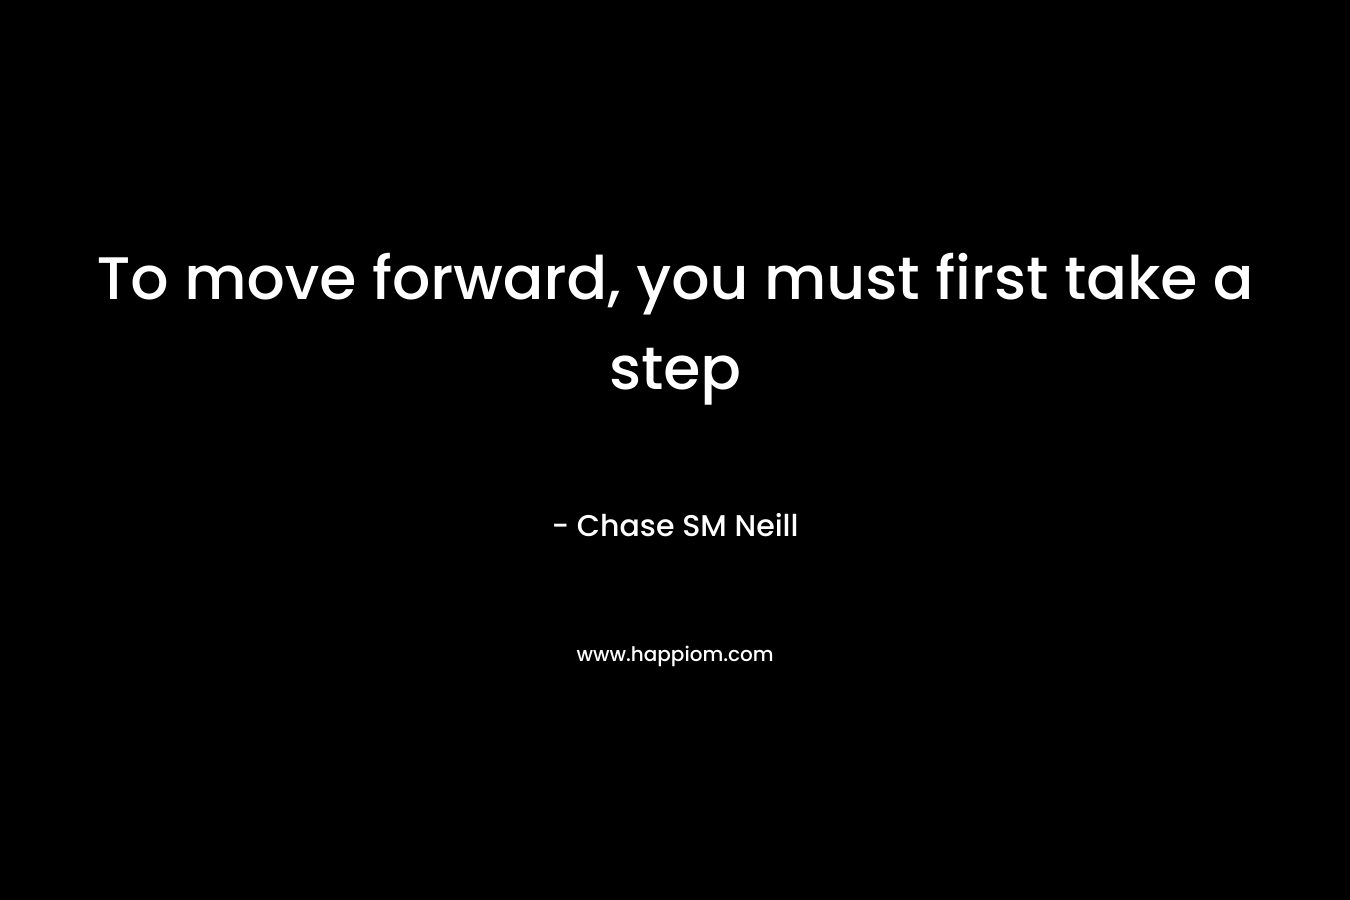 To move forward, you must first take a step